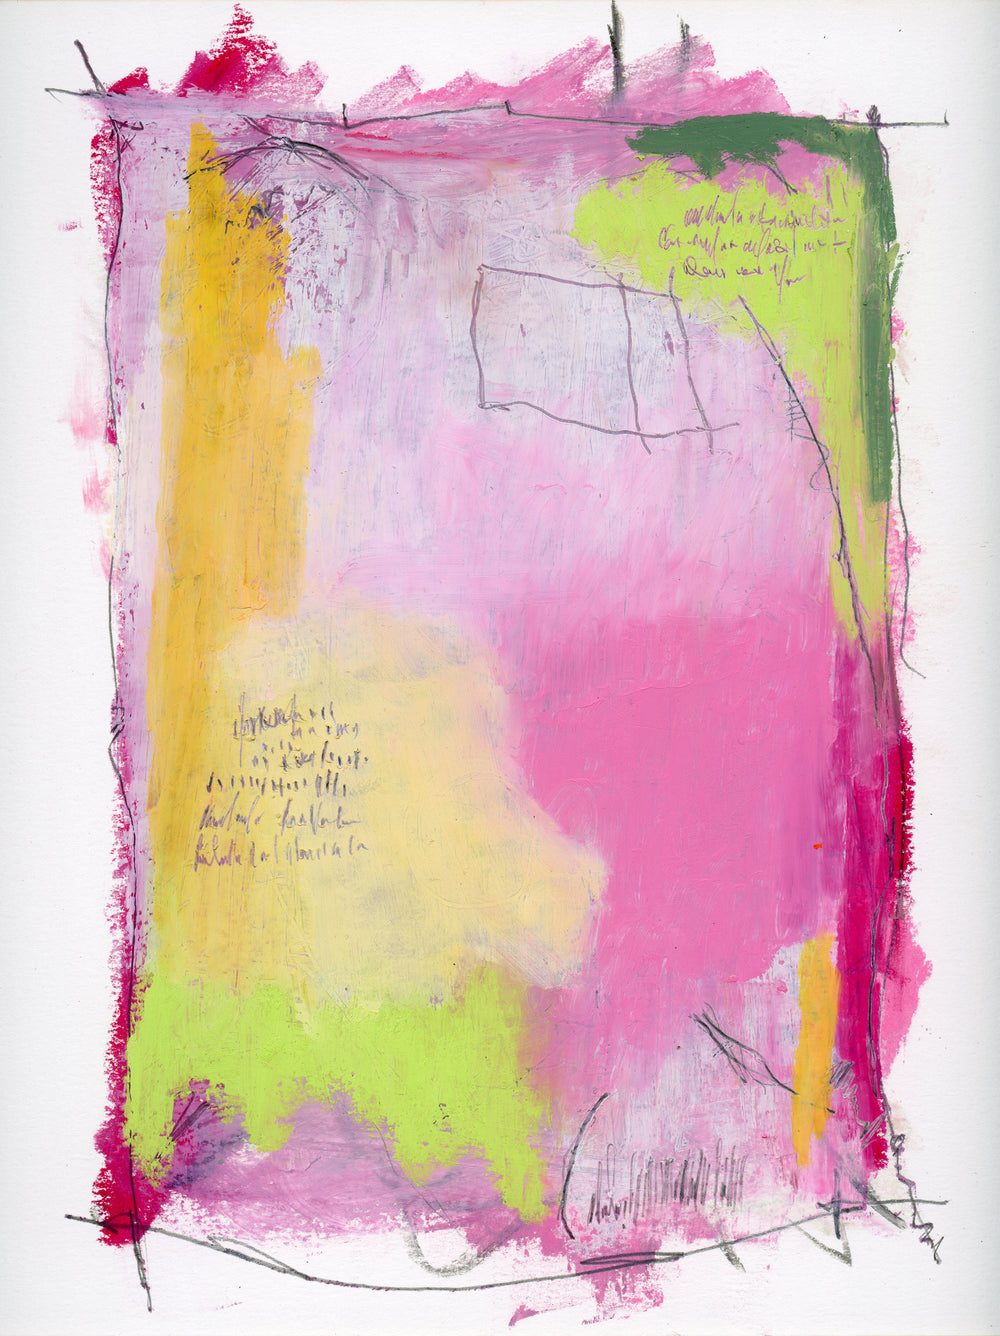 abstract pastel drawing featuring hues of pink, yellow and green, with written text